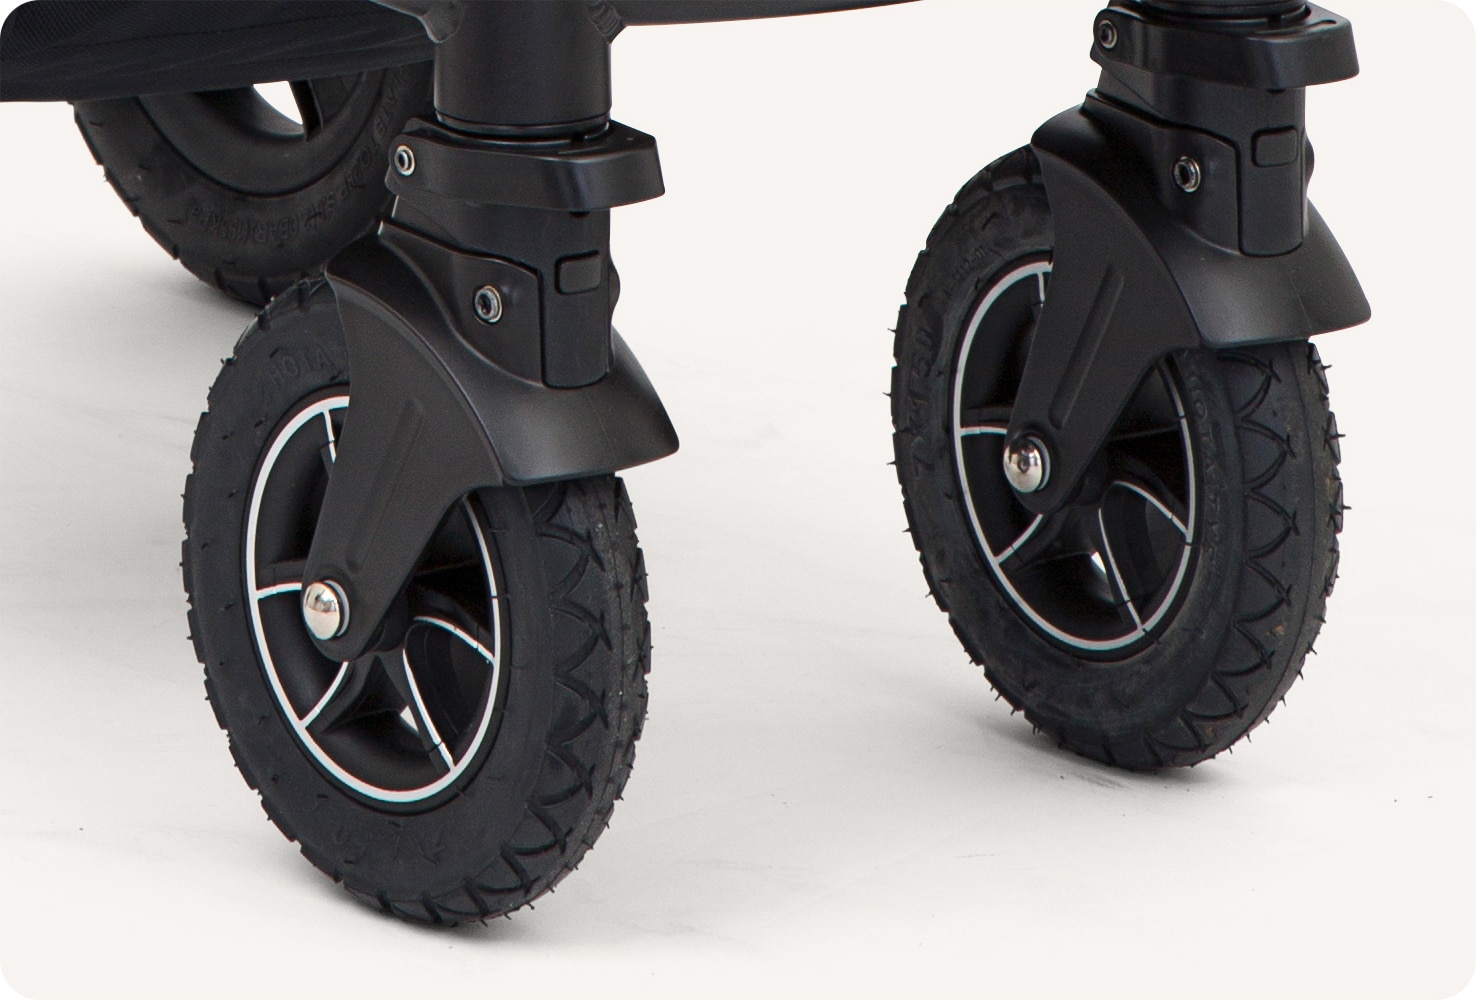 Closeup on the rubber tyres of the Mytrax Flex stroller.